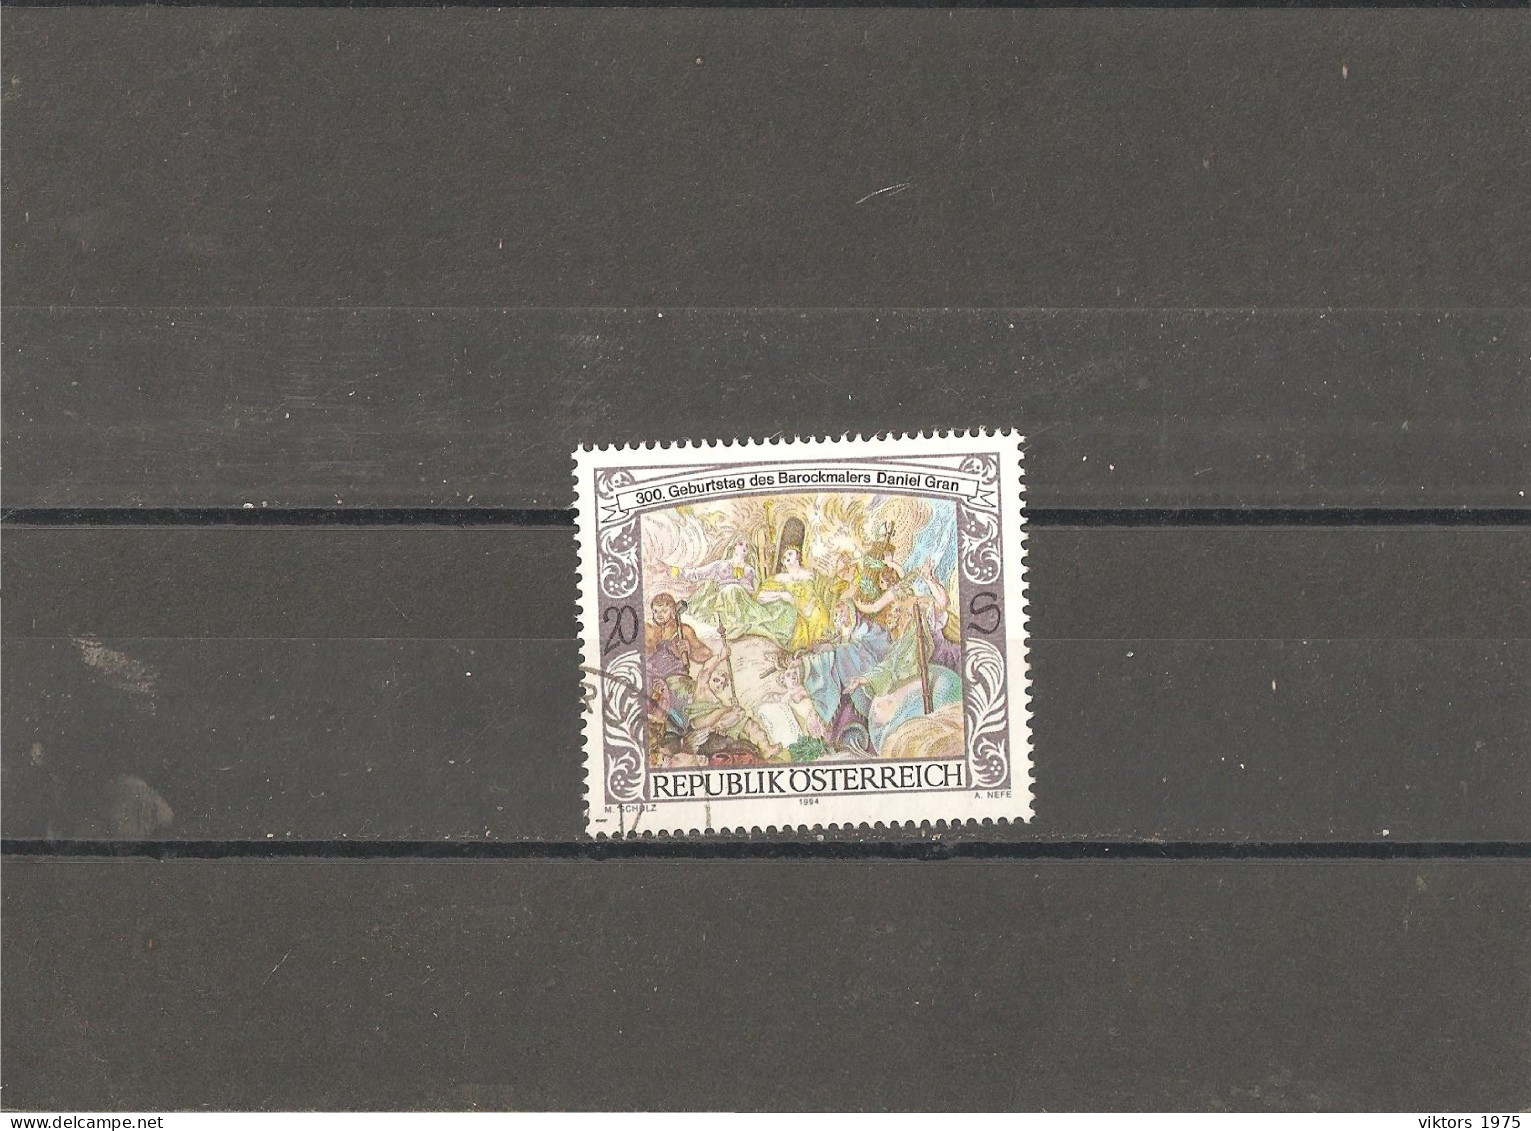 Used Stamp Nr.2125 In MICHEL Catalog - Used Stamps